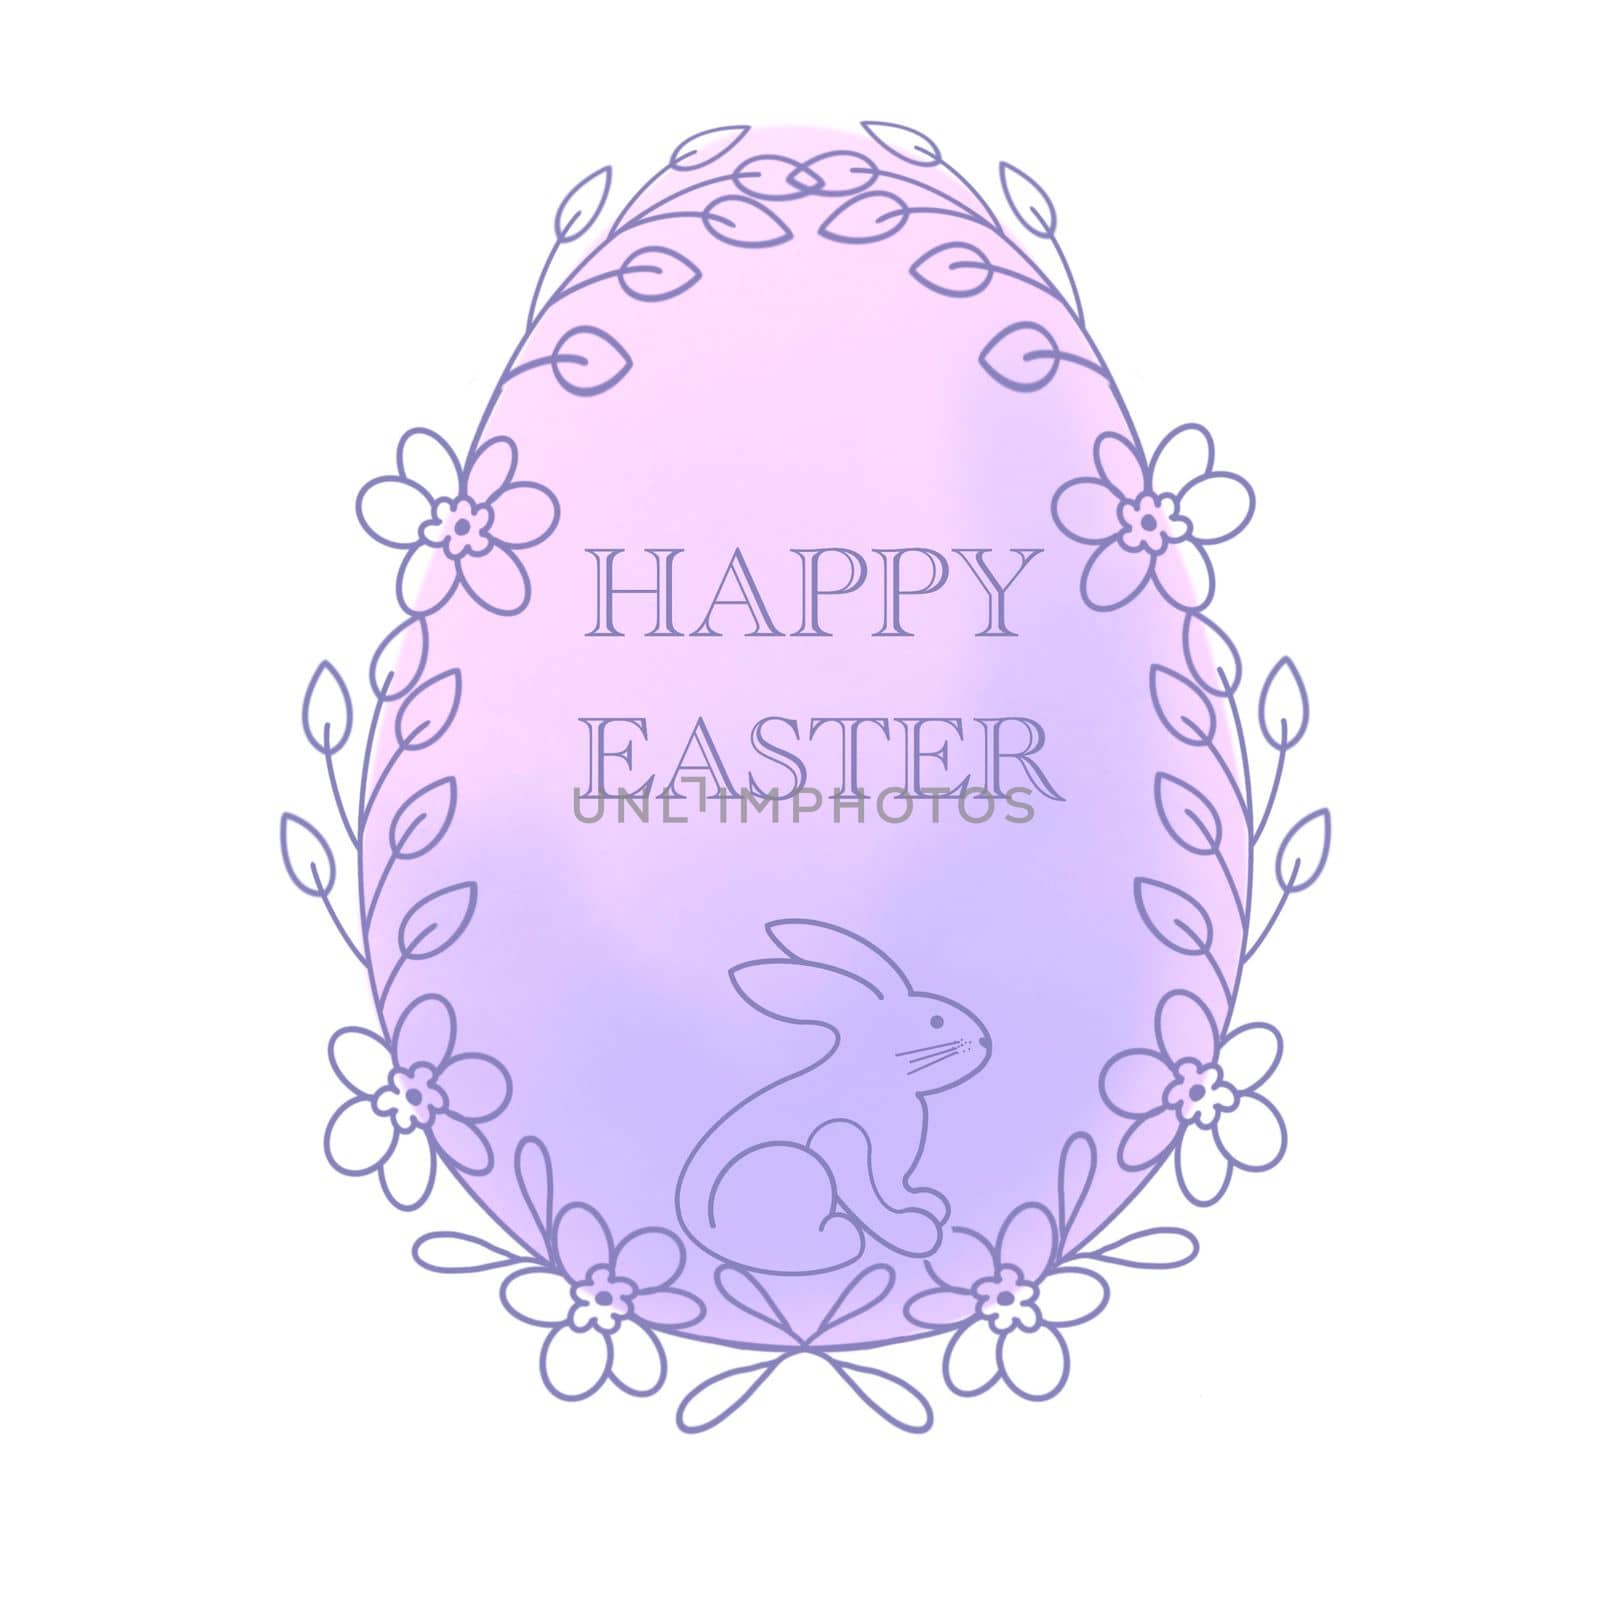 Floral banner with happy easter bunny.